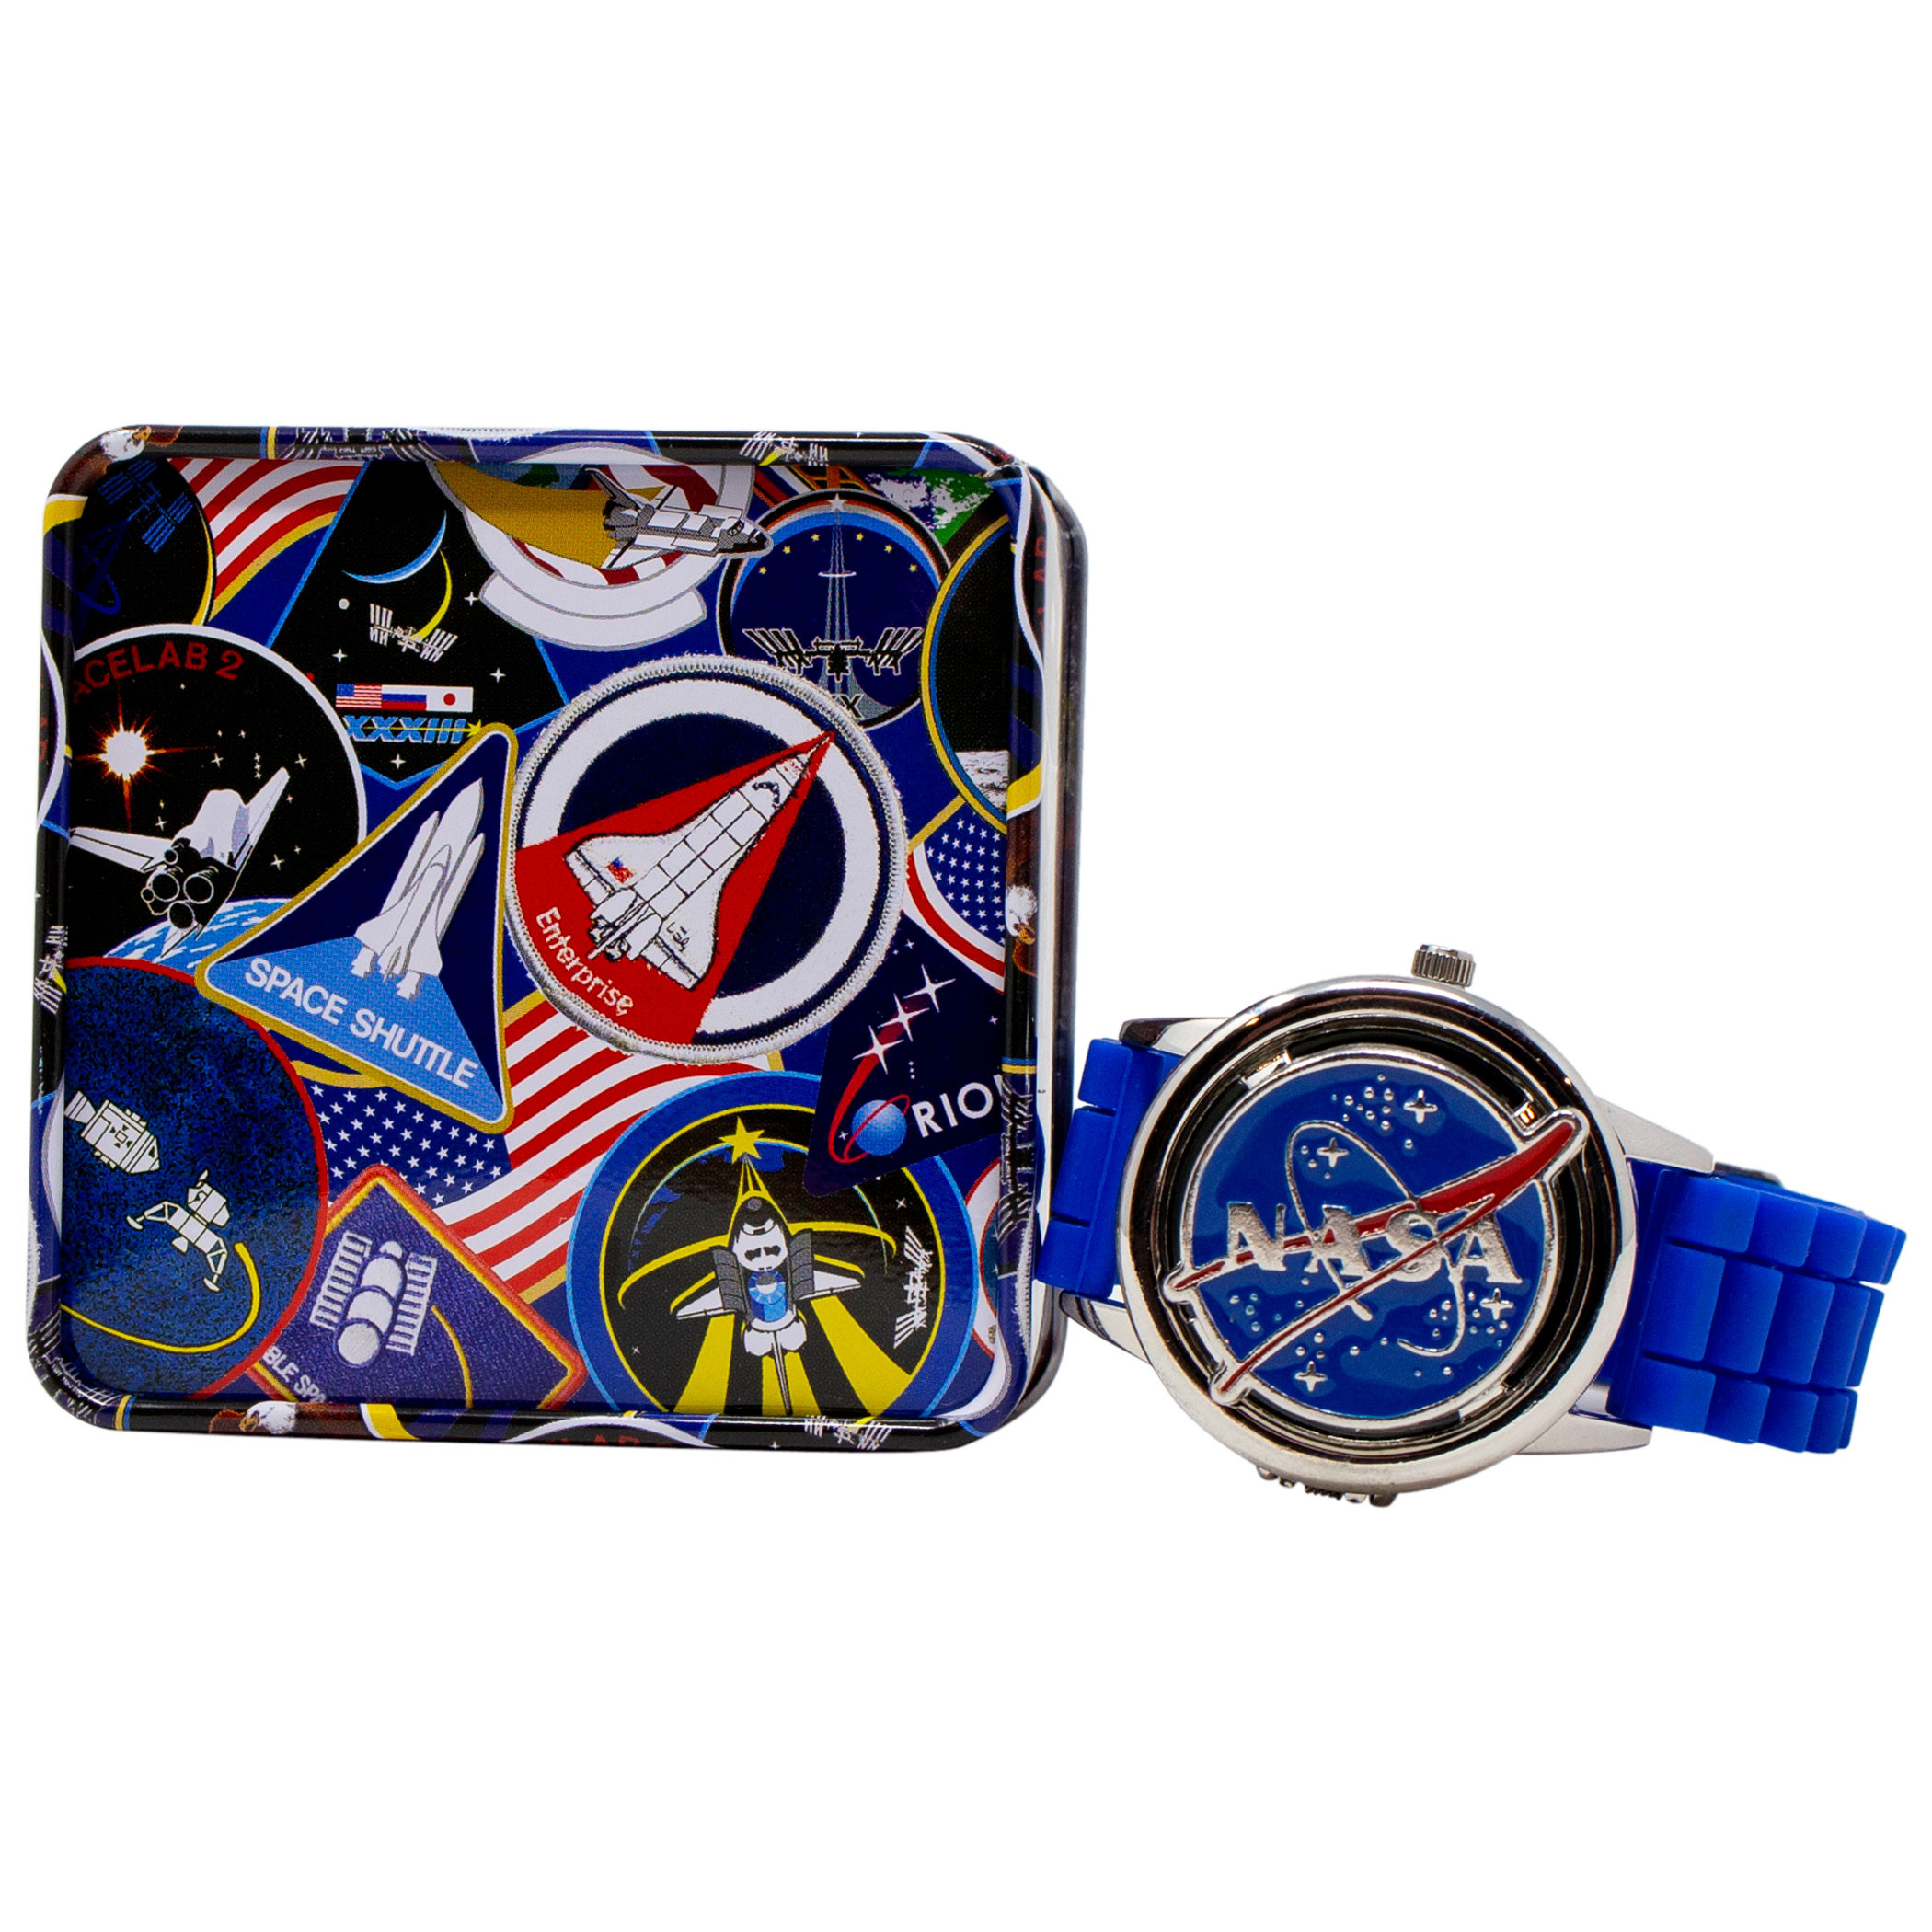 NASA Logo with Space Themed Dial Watch